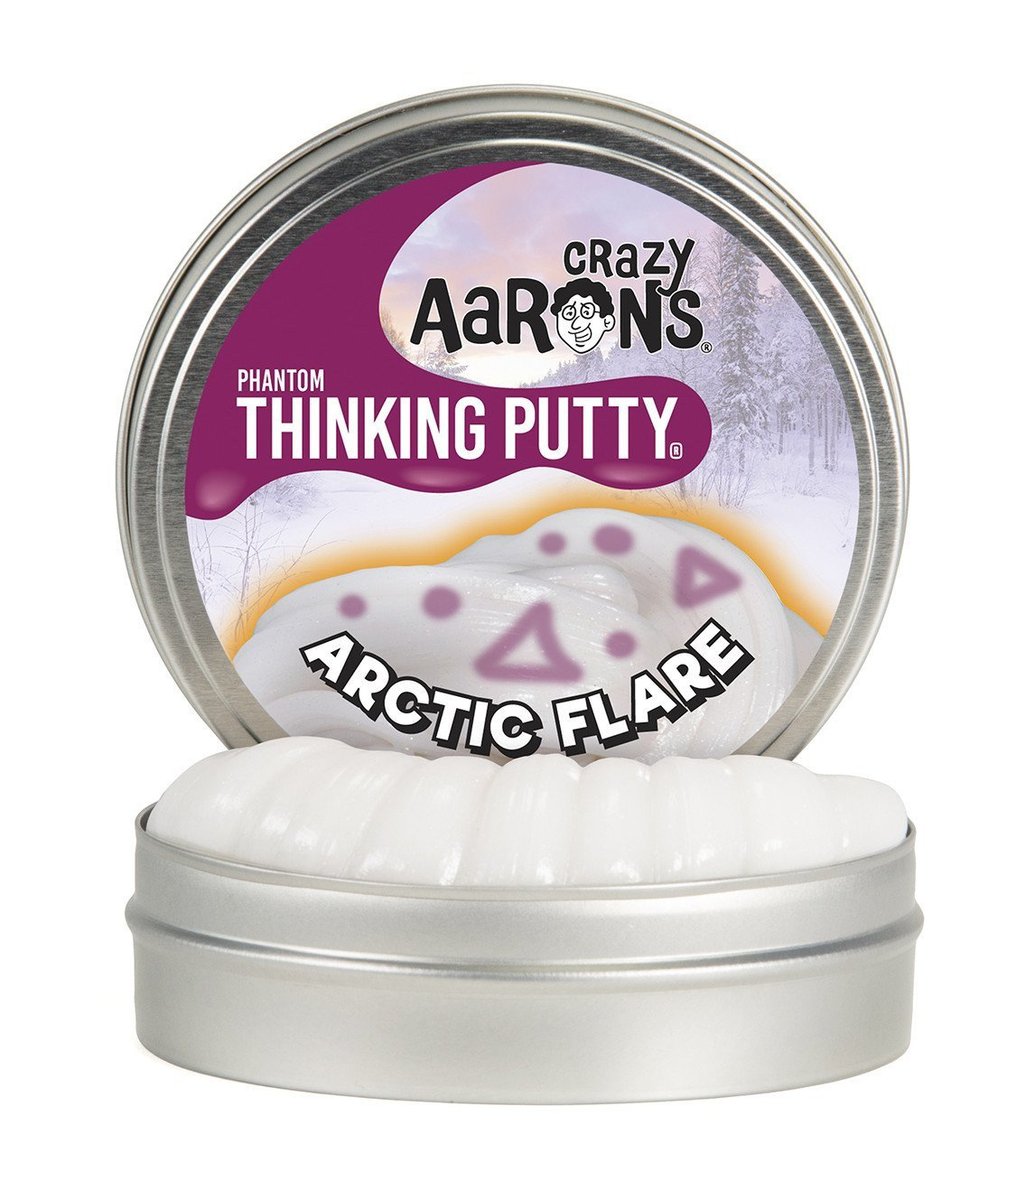 Arctic Flare 4inch - Crazy Aarons Thinking Putty